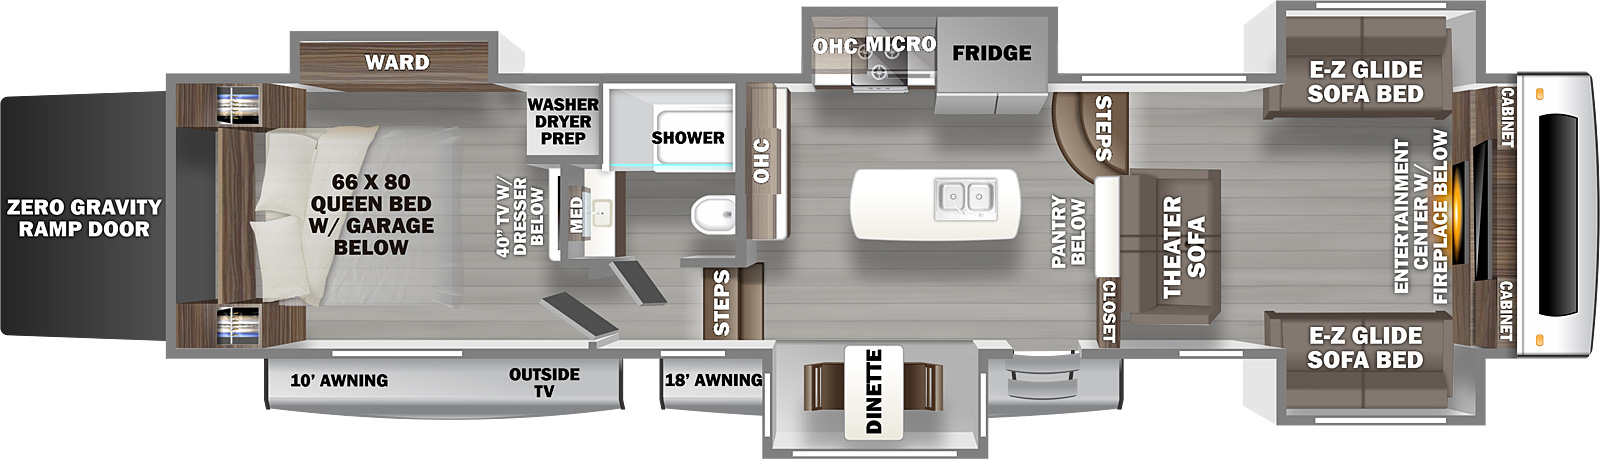 The Riverstone 37FLTH has one entry door, five slideouts, two electric awnings, and a rear ramp door. Two of the slideouts are on the door side of the RV, three slideouts are on the off-door side. One awning is 18 feet and is over the entry door toward the middle of the RV. The other awning is 10 feet and is toward the rear of the RV. An exterior TV is beneath this awning. The entry door leads to a kitchen area. A slideout with a table and two chairs is directly to the left of the entry door. The rear door side corner of the kitchen area has steps leading to a rear hallway. The rear off-door side corner has a hutch with a counter top and storage. The off door side slideout has a countertop with a stove and a refrigerator. Storage is above the countertop and a microwave is above the stove. The refrigerator is to the right of the stove. The front off door side corner of the kitchen area has steps leading to the front living area. A kitchen island with a countertop and a sink is in the middle of the kitchen are. The front of the kitchen area, between the steps and the entry door has a pantry and storage area. The steps in the front of the kitchen area lead to a living area. The off door side of the living area has a slideout with a sofa bed. The front of the living area has an entertainment center with an electric fireplace below. There are storage cabinets on the right and left of the entertainment center. The door side slideout has a sofa bed. The door side rear corner of the 